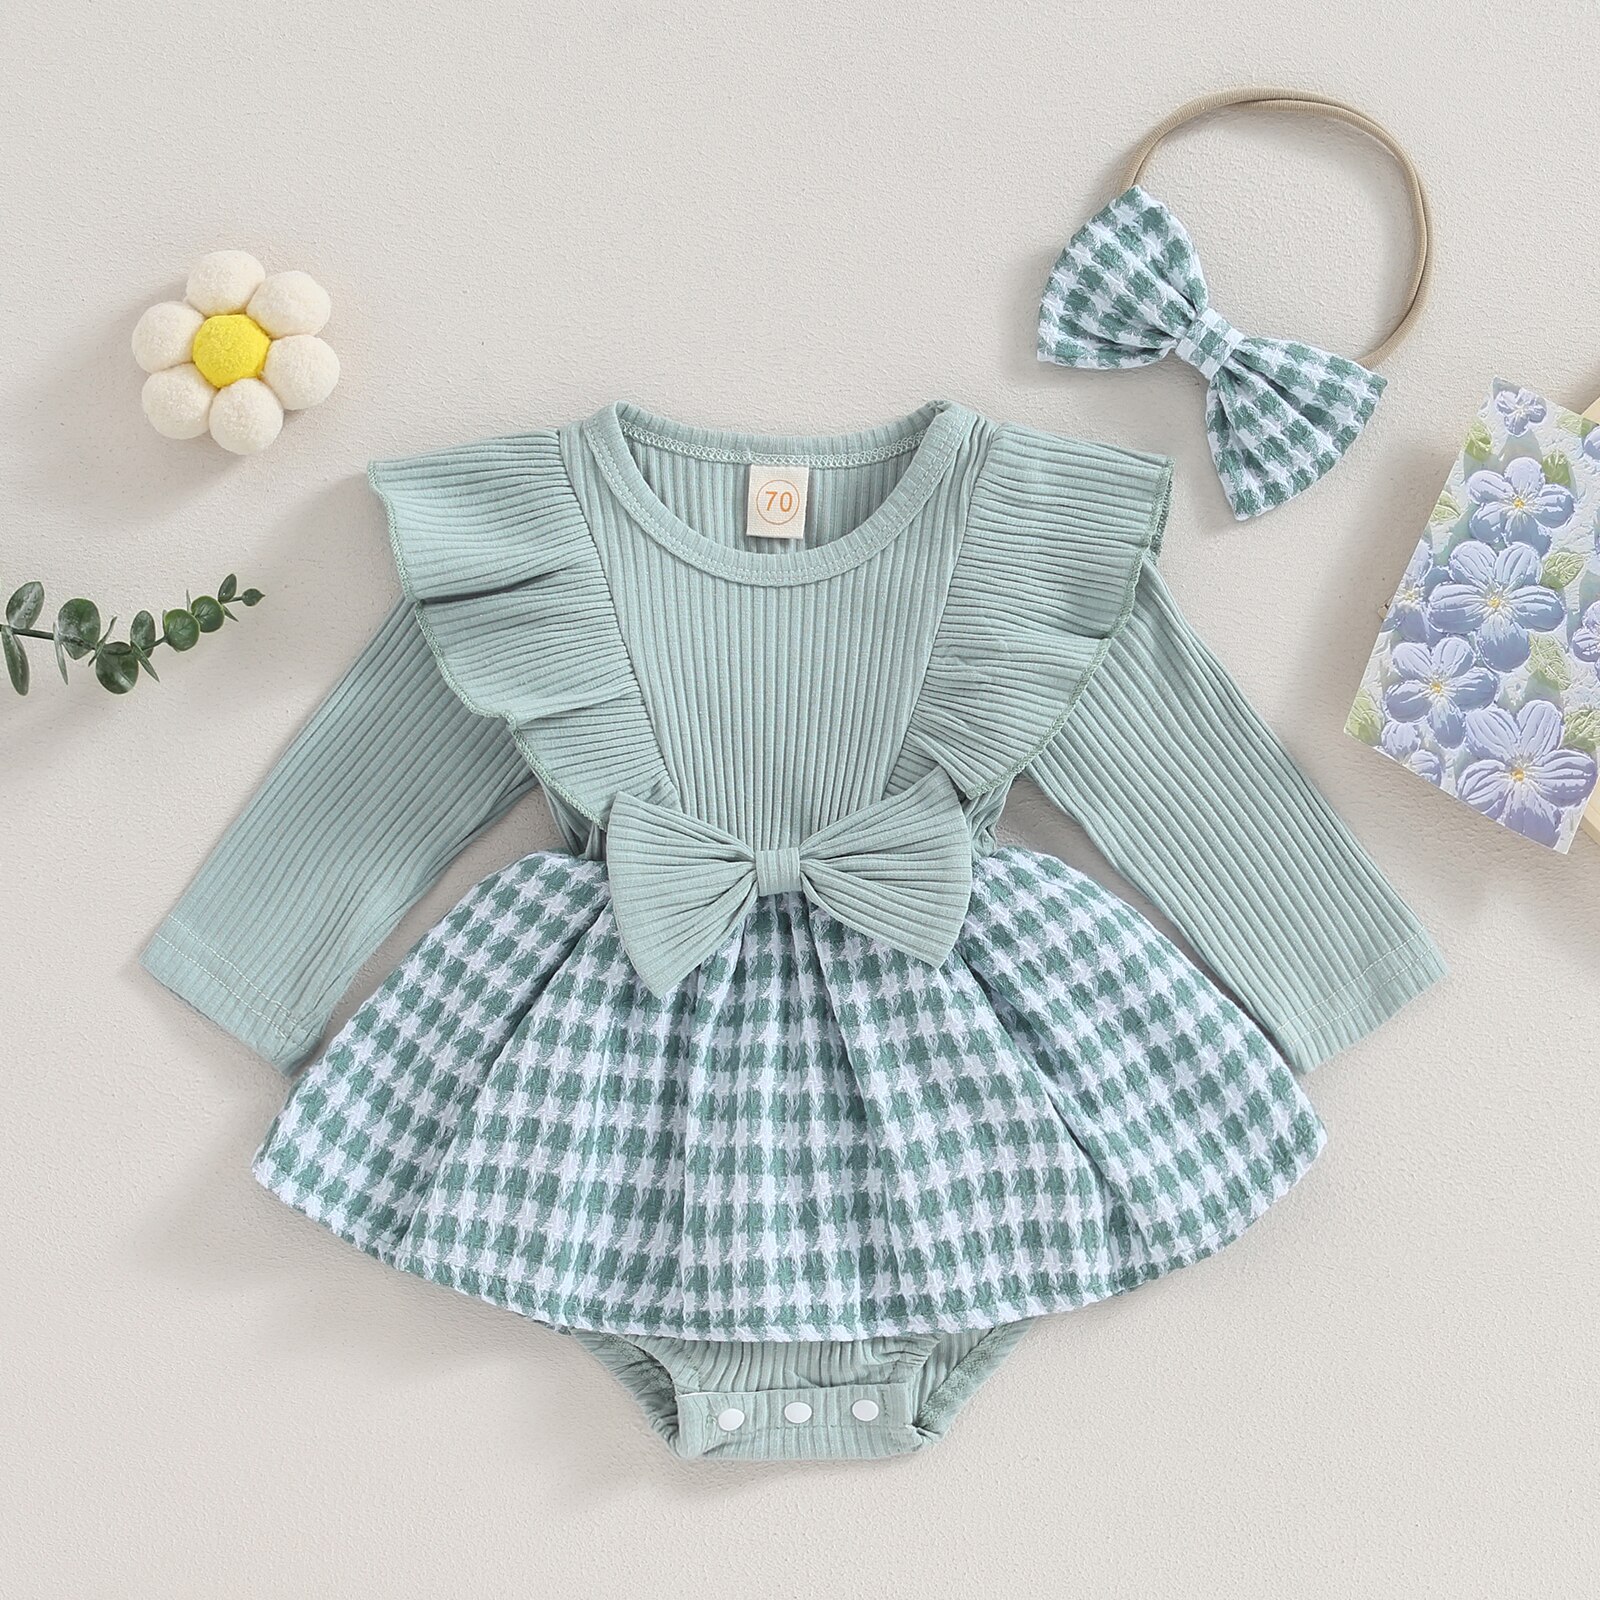 Pudcoco-Baby-Girls-2-Piece-Outfits-Houndstooth-Print-Long-Sleeves-Romper-Dress-and-Cute-Headband-for-3